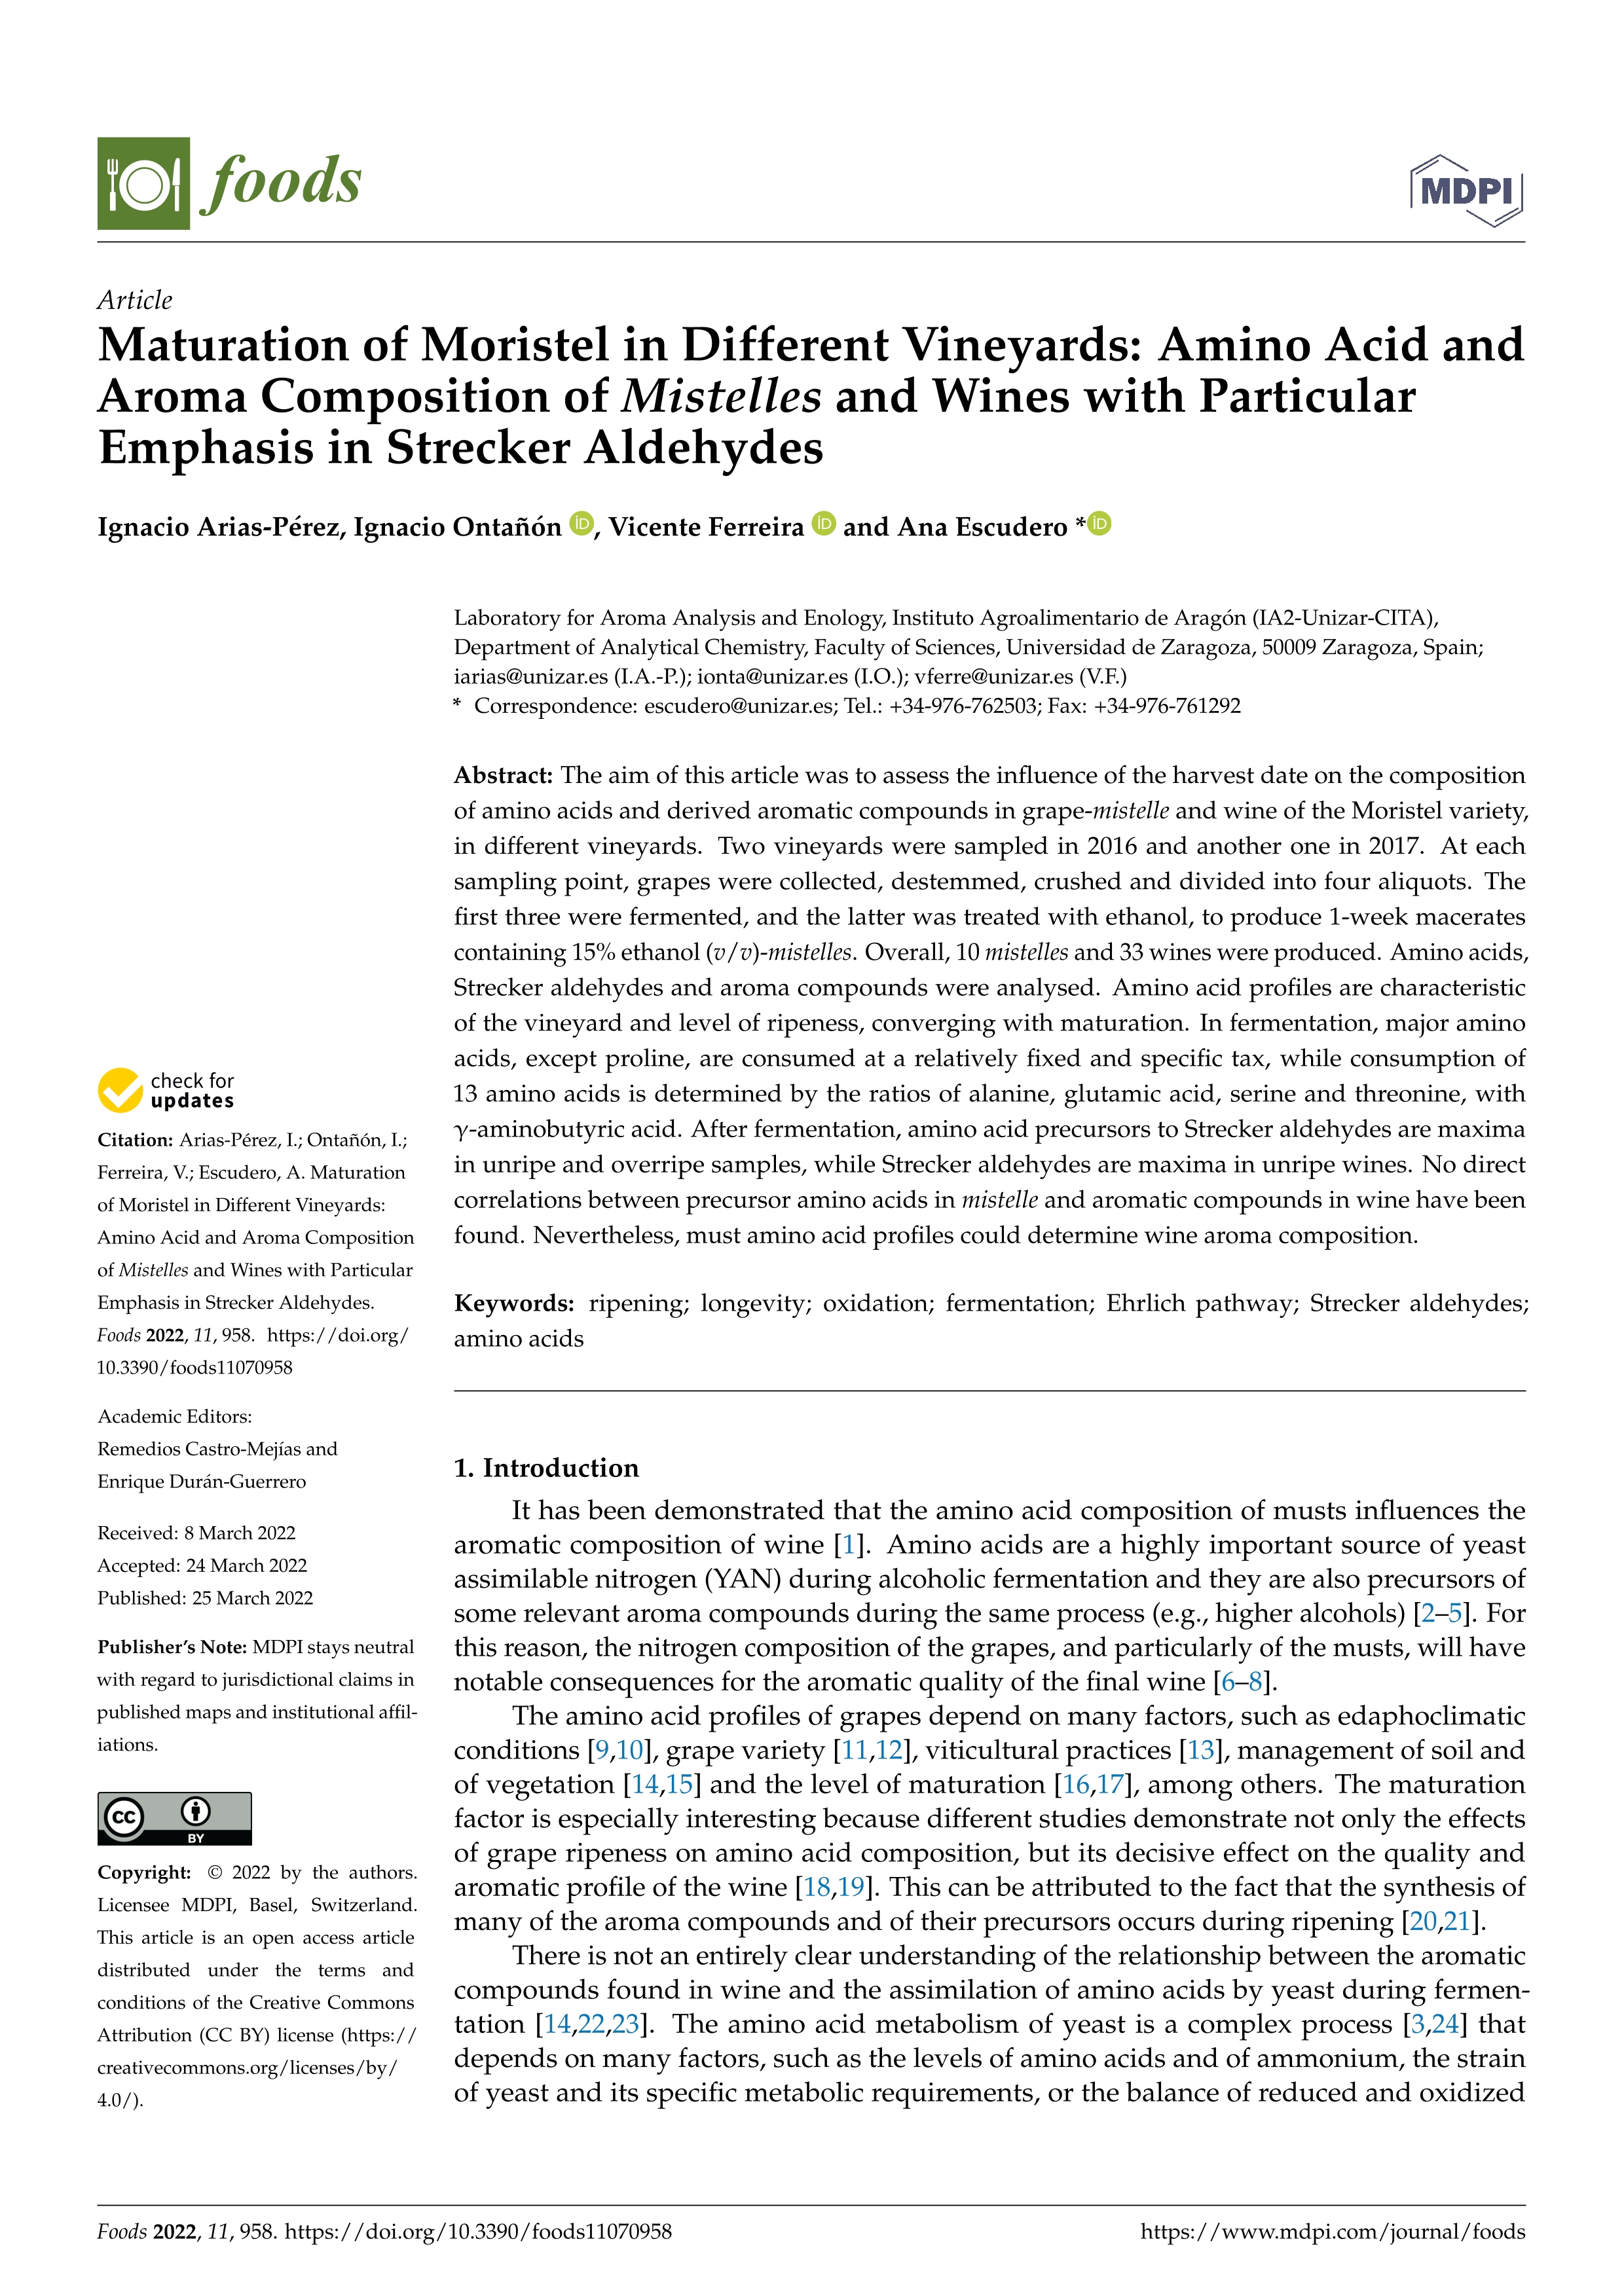 Maturation of Moristel in Different Vineyards: Amino Acid and Aroma Composition of Mistelles and Wines with Particular Emphasis in Strecker Aldehydes